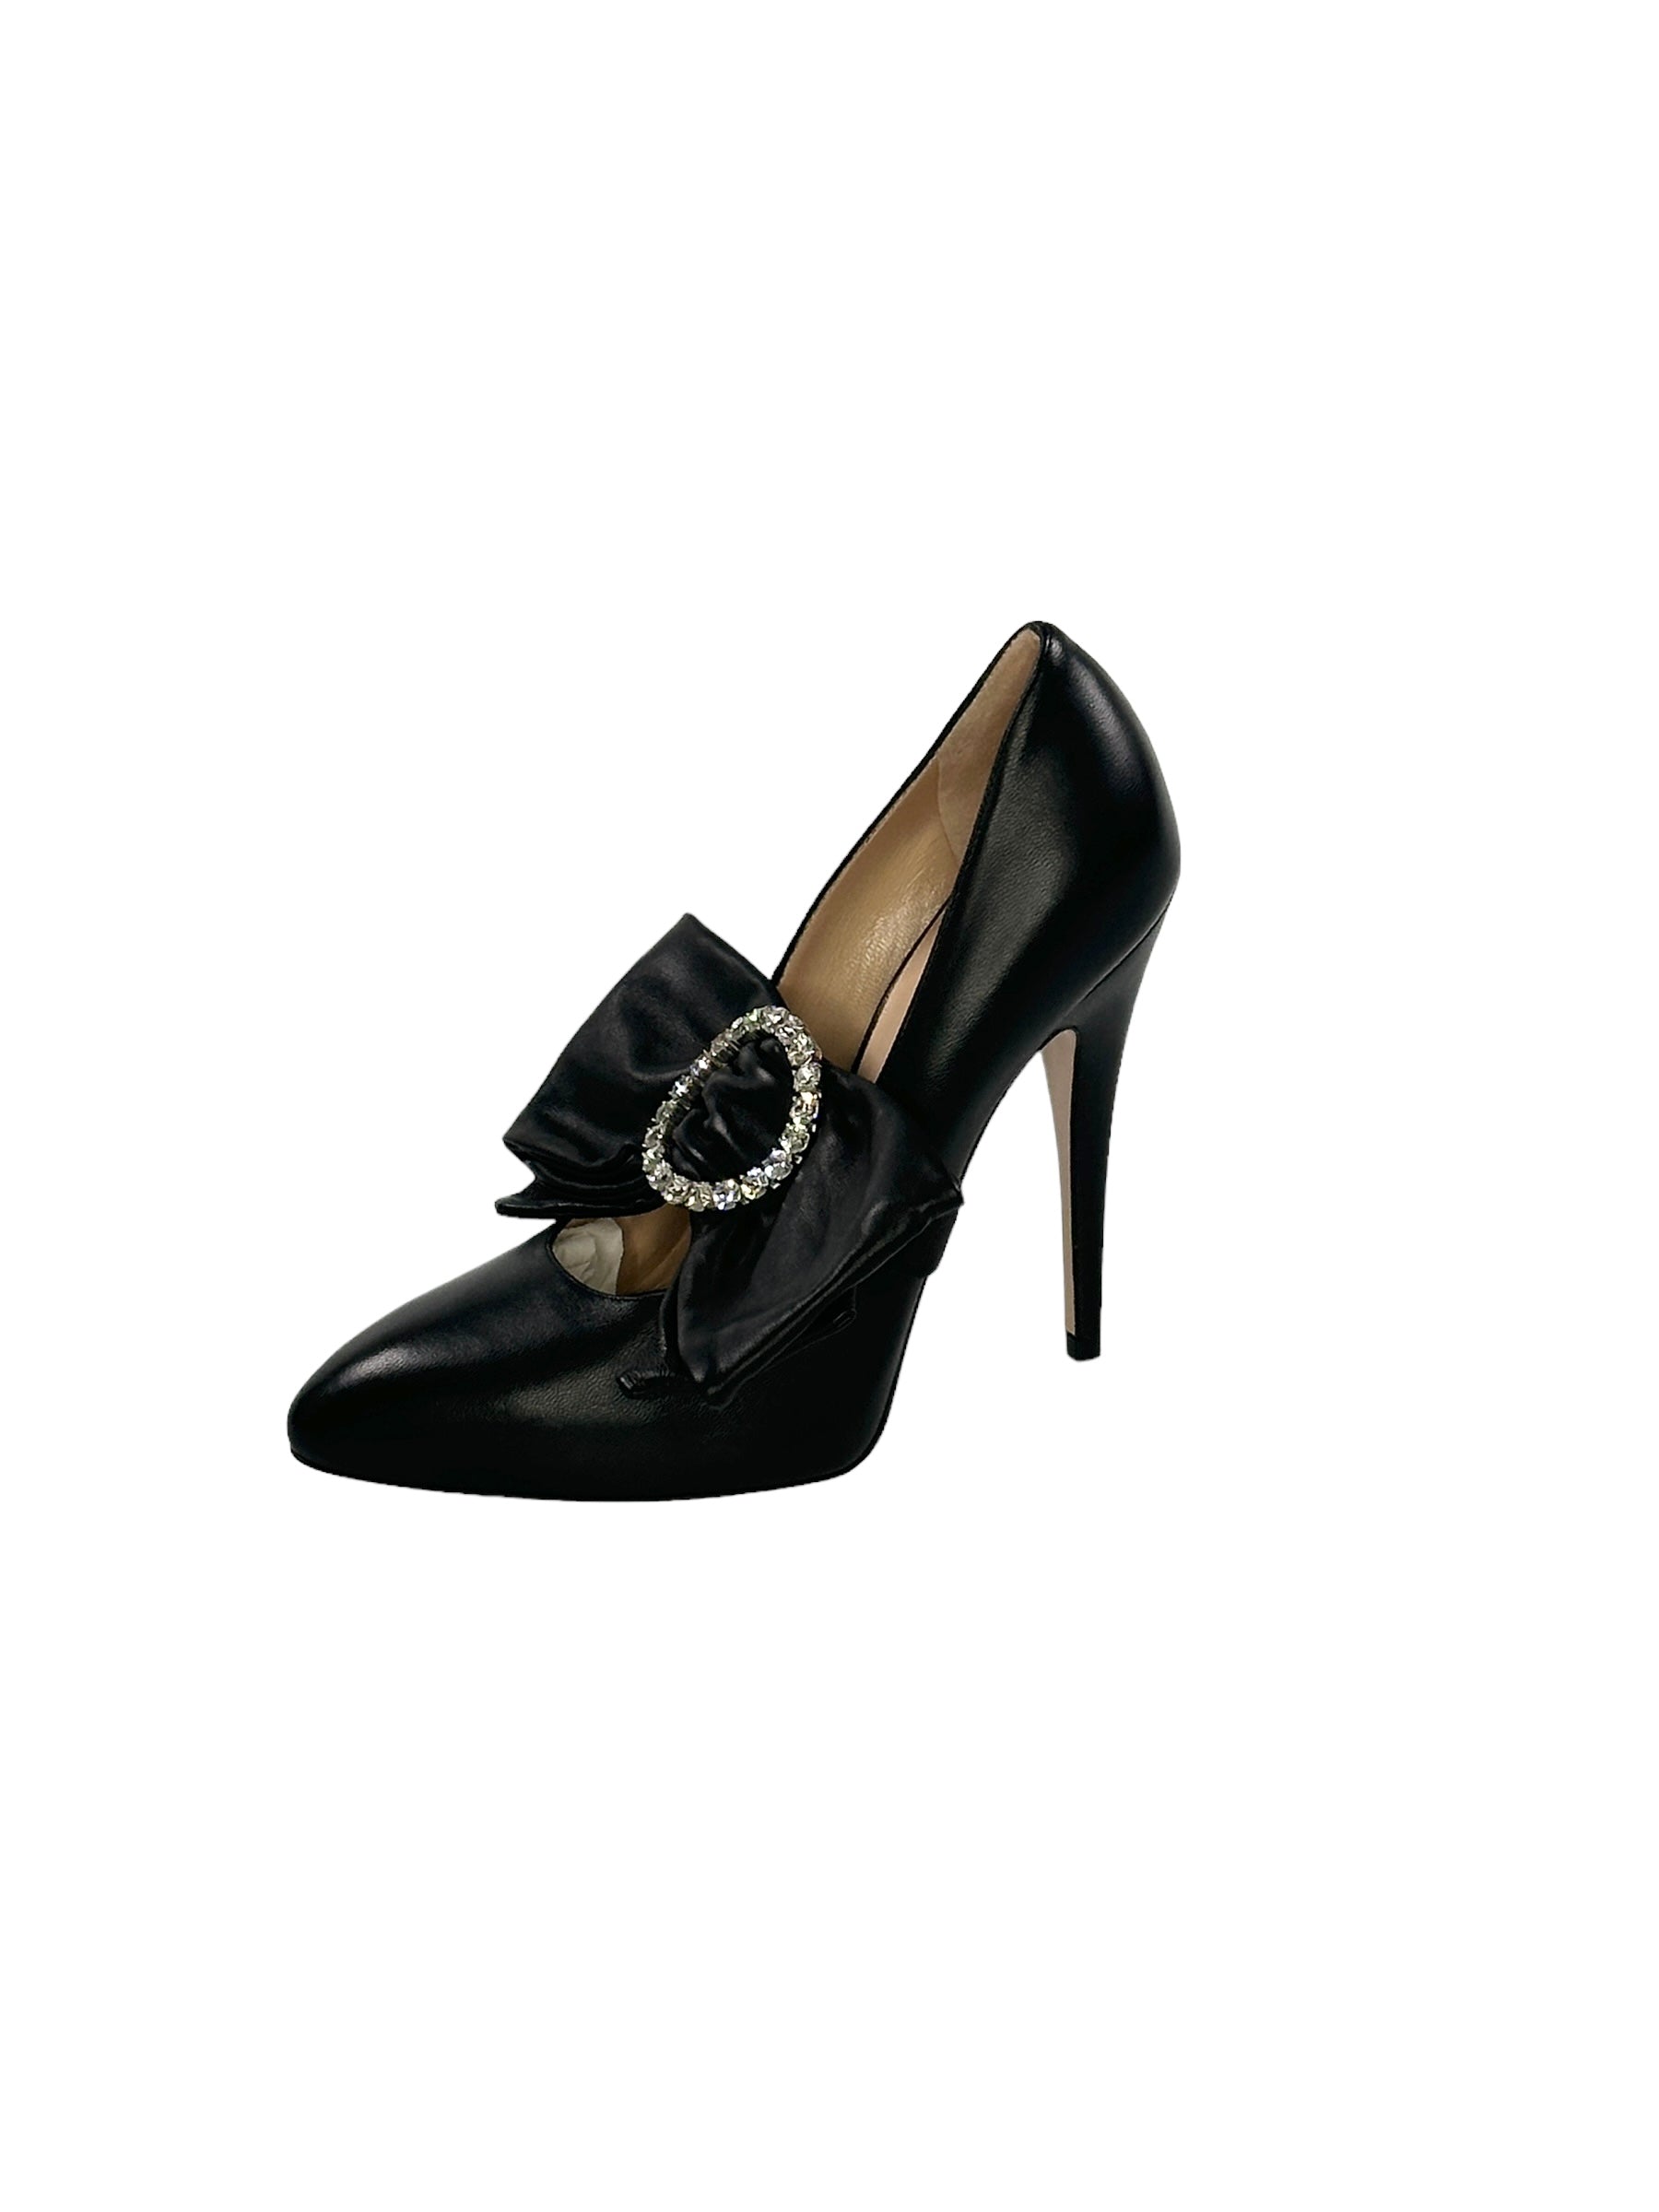 GUCCI Charlotte Leather Pumps with Ribbon / Black